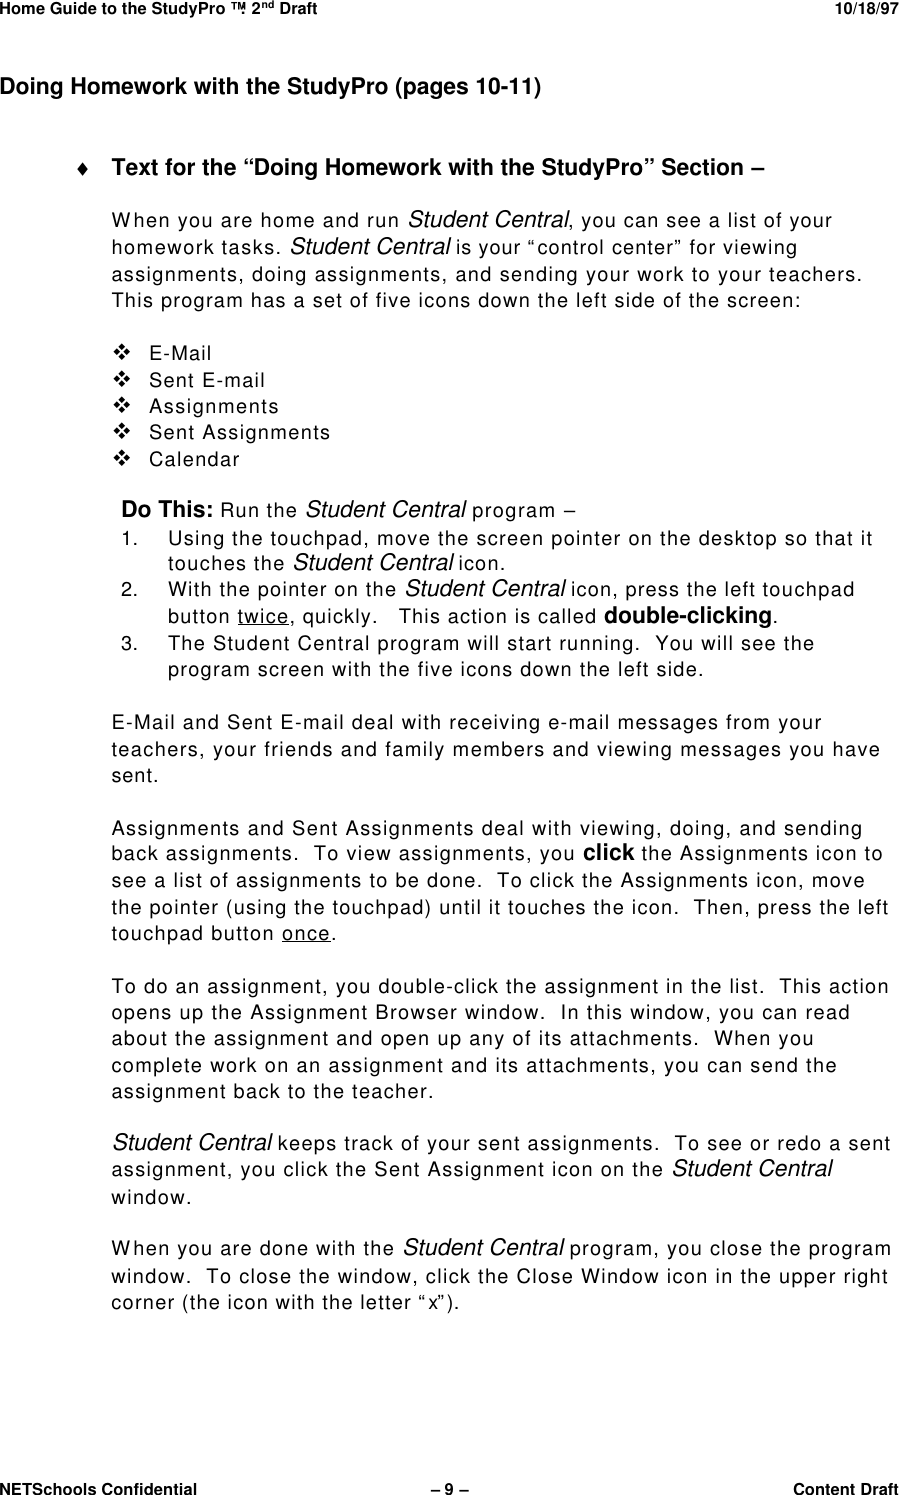 Home Guide to the StudyPro™: 2nd Draft 10/18/97NETSchools Confidential – 9 –Content DraftDoing Homework with the StudyPro (pages 10-11)♦ Text for the “Doing Homework with the StudyPro” Section –When you are home and run Student Central, you can see a list of yourhomework tasks. Student Central is your “control center” for viewingassignments, doing assignments, and sending your work to your teachers.This program has a set of five icons down the left side of the screen:v E-Mailv Sent E-mailv Assignmentsv Sent Assignmentsv CalendarDo This: Run the Student Central program –1. Using the touchpad, move the screen pointer on the desktop so that ittouches the Student Central icon.2. With the pointer on the Student Central icon, press the left touchpadbutton twice, quickly.   This action is called double-clicking.3. The Student Central program will start running.  You will see theprogram screen with the five icons down the left side.E-Mail and Sent E-mail deal with receiving e-mail messages from yourteachers, your friends and family members and viewing messages you havesent.Assignments and Sent Assignments deal with viewing, doing, and sendingback assignments.  To view assignments, you click the Assignments icon tosee a list of assignments to be done.  To click the Assignments icon, movethe pointer (using the touchpad) until it touches the icon.  Then, press the lefttouchpad button once.To do an assignment, you double-click the assignment in the list.  This actionopens up the Assignment Browser window.  In this window, you can readabout the assignment and open up any of its attachments.  When youcomplete work on an assignment and its attachments, you can send theassignment back to the teacher.Student Central keeps track of your sent assignments.  To see or redo a sentassignment, you click the Sent Assignment icon on the Student Centralwindow.When you are done with the Student Central program, you close the programwindow.  To close the window, click the Close Window icon in the upper rightcorner (the icon with the letter “x”).